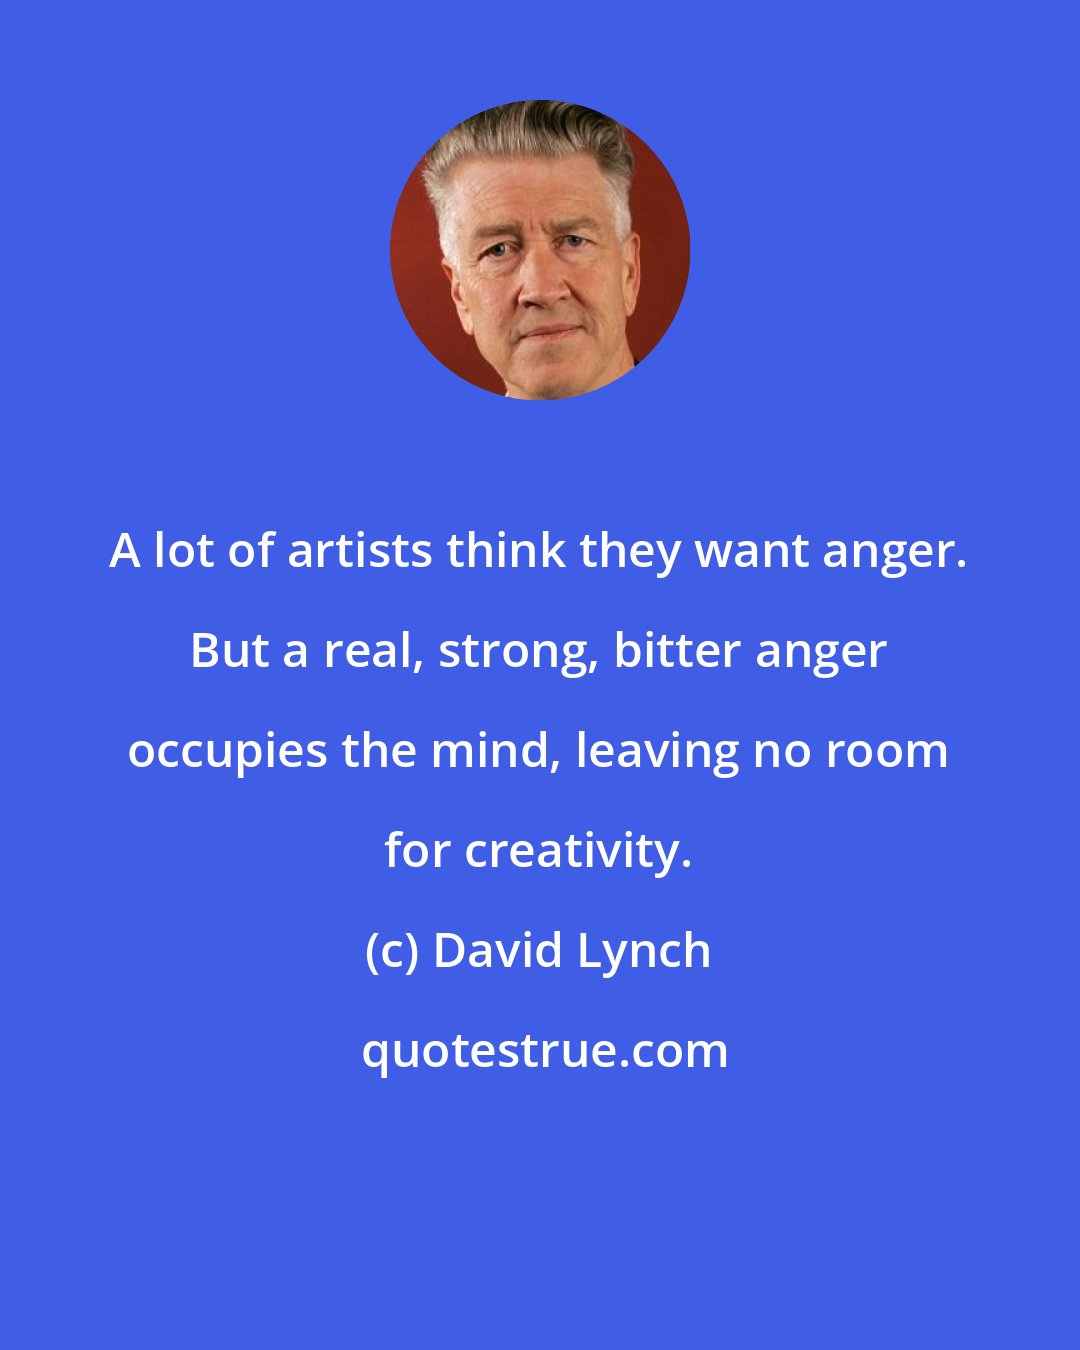 David Lynch: A lot of artists think they want anger. But a real, strong, bitter anger occupies the mind, leaving no room for creativity.